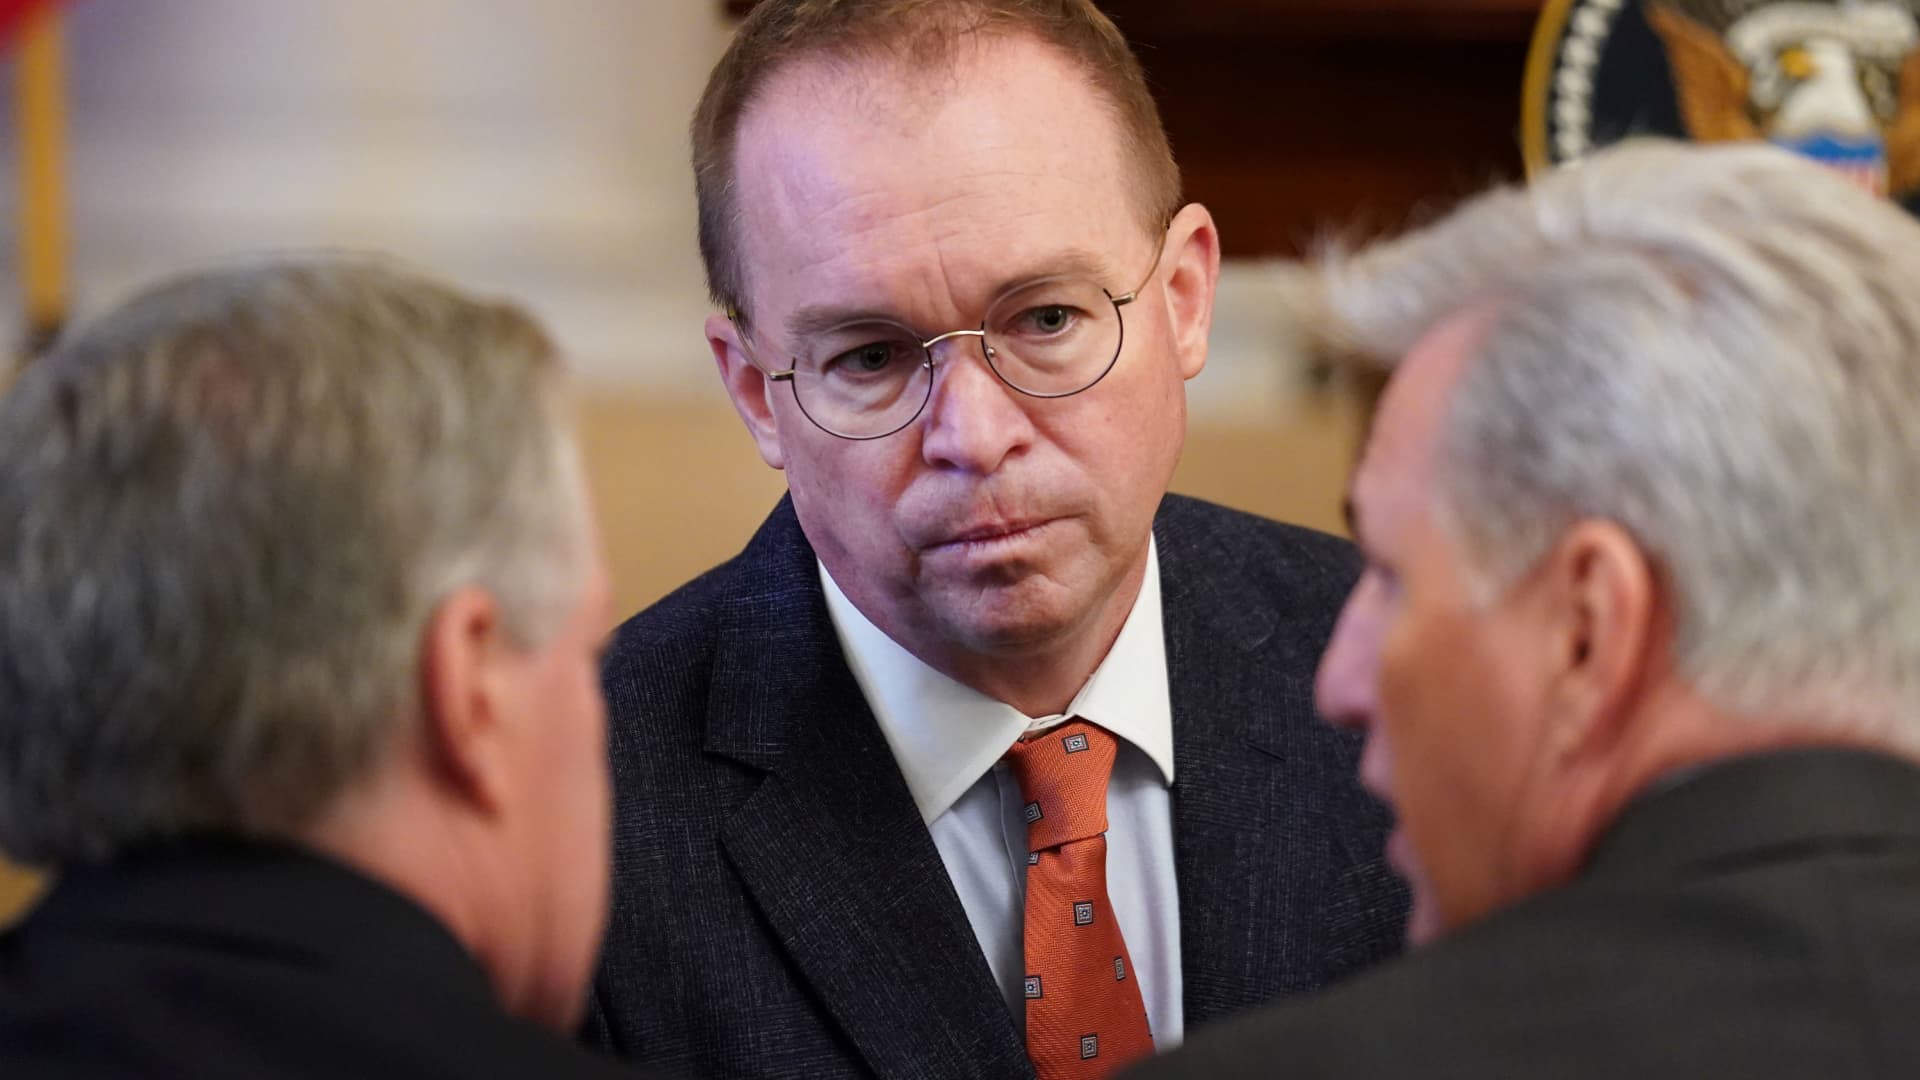 Former Trump White House chief of staff Mick Mulvaney to meet with Jan. 6 Capitol riot committee